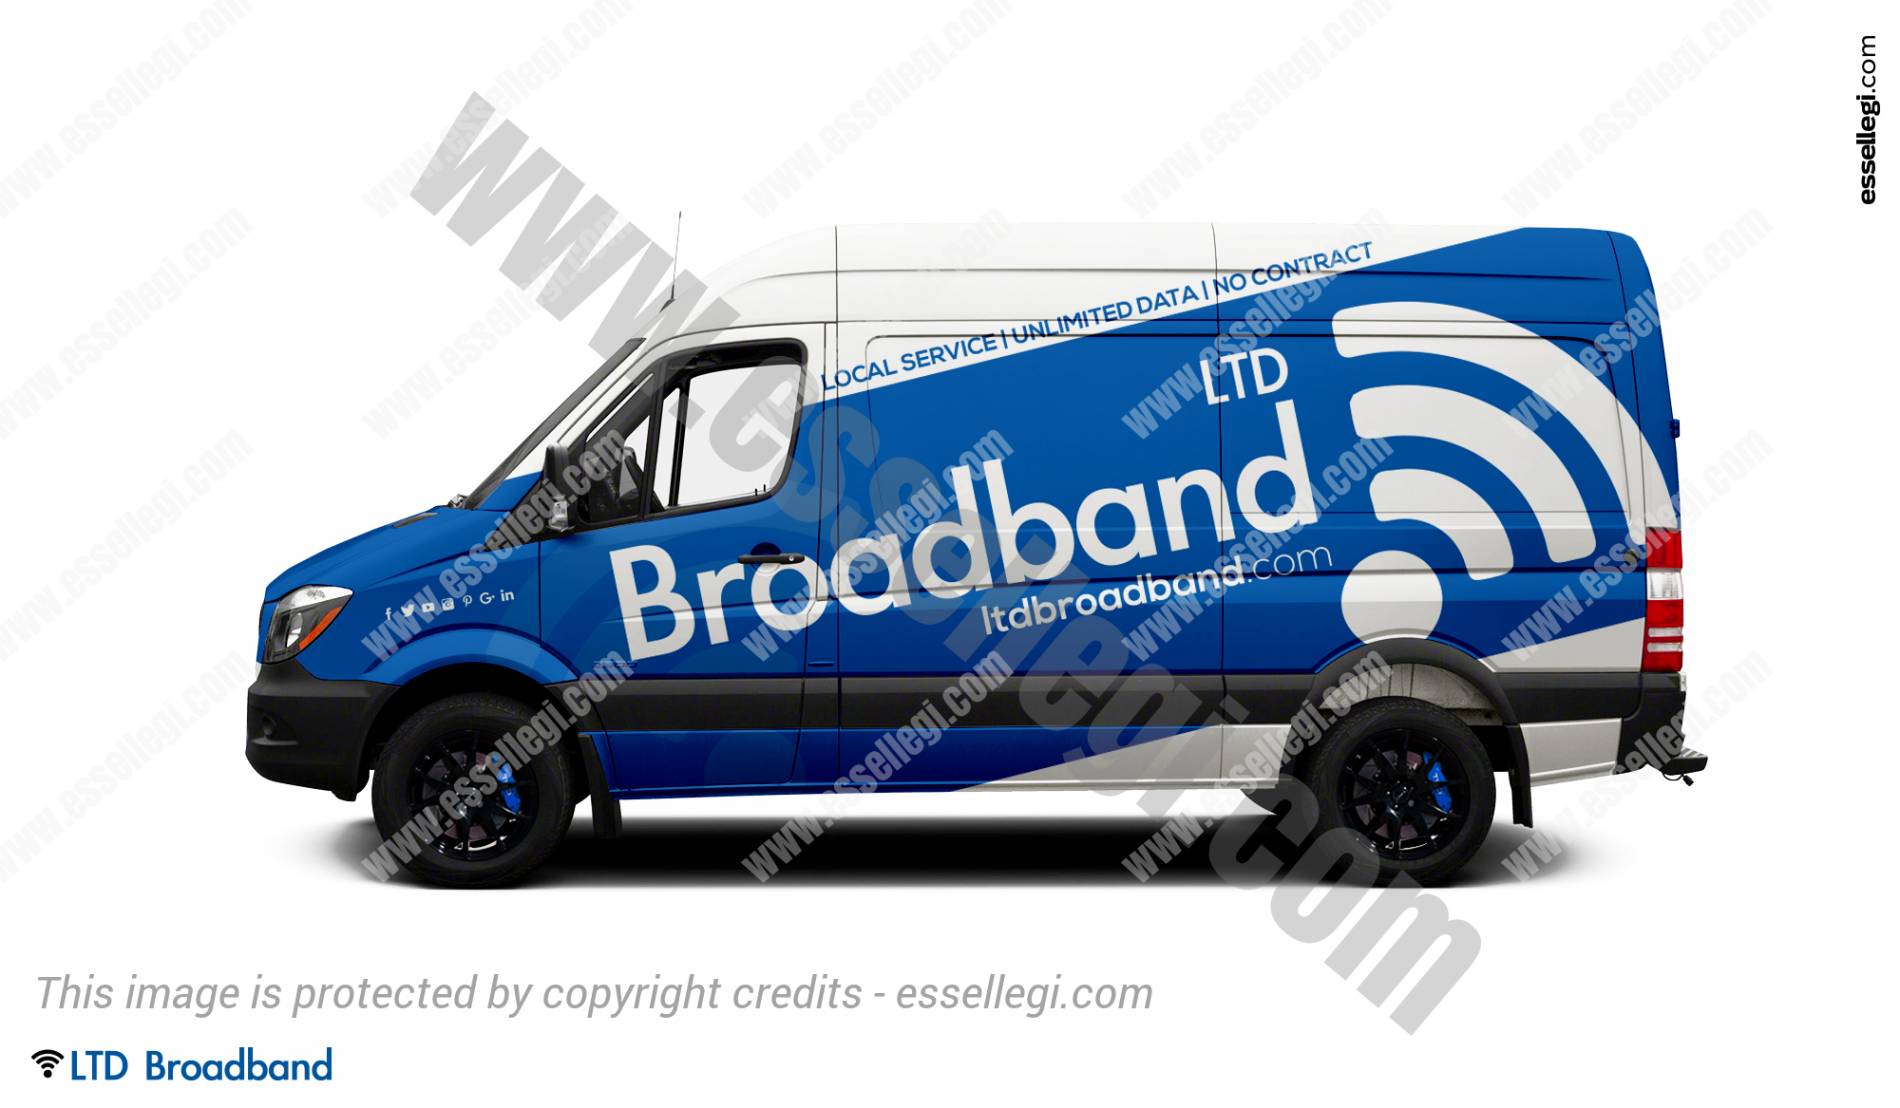 Mercedes Sprinter Wrap For Telecommunications Services By Essellegi